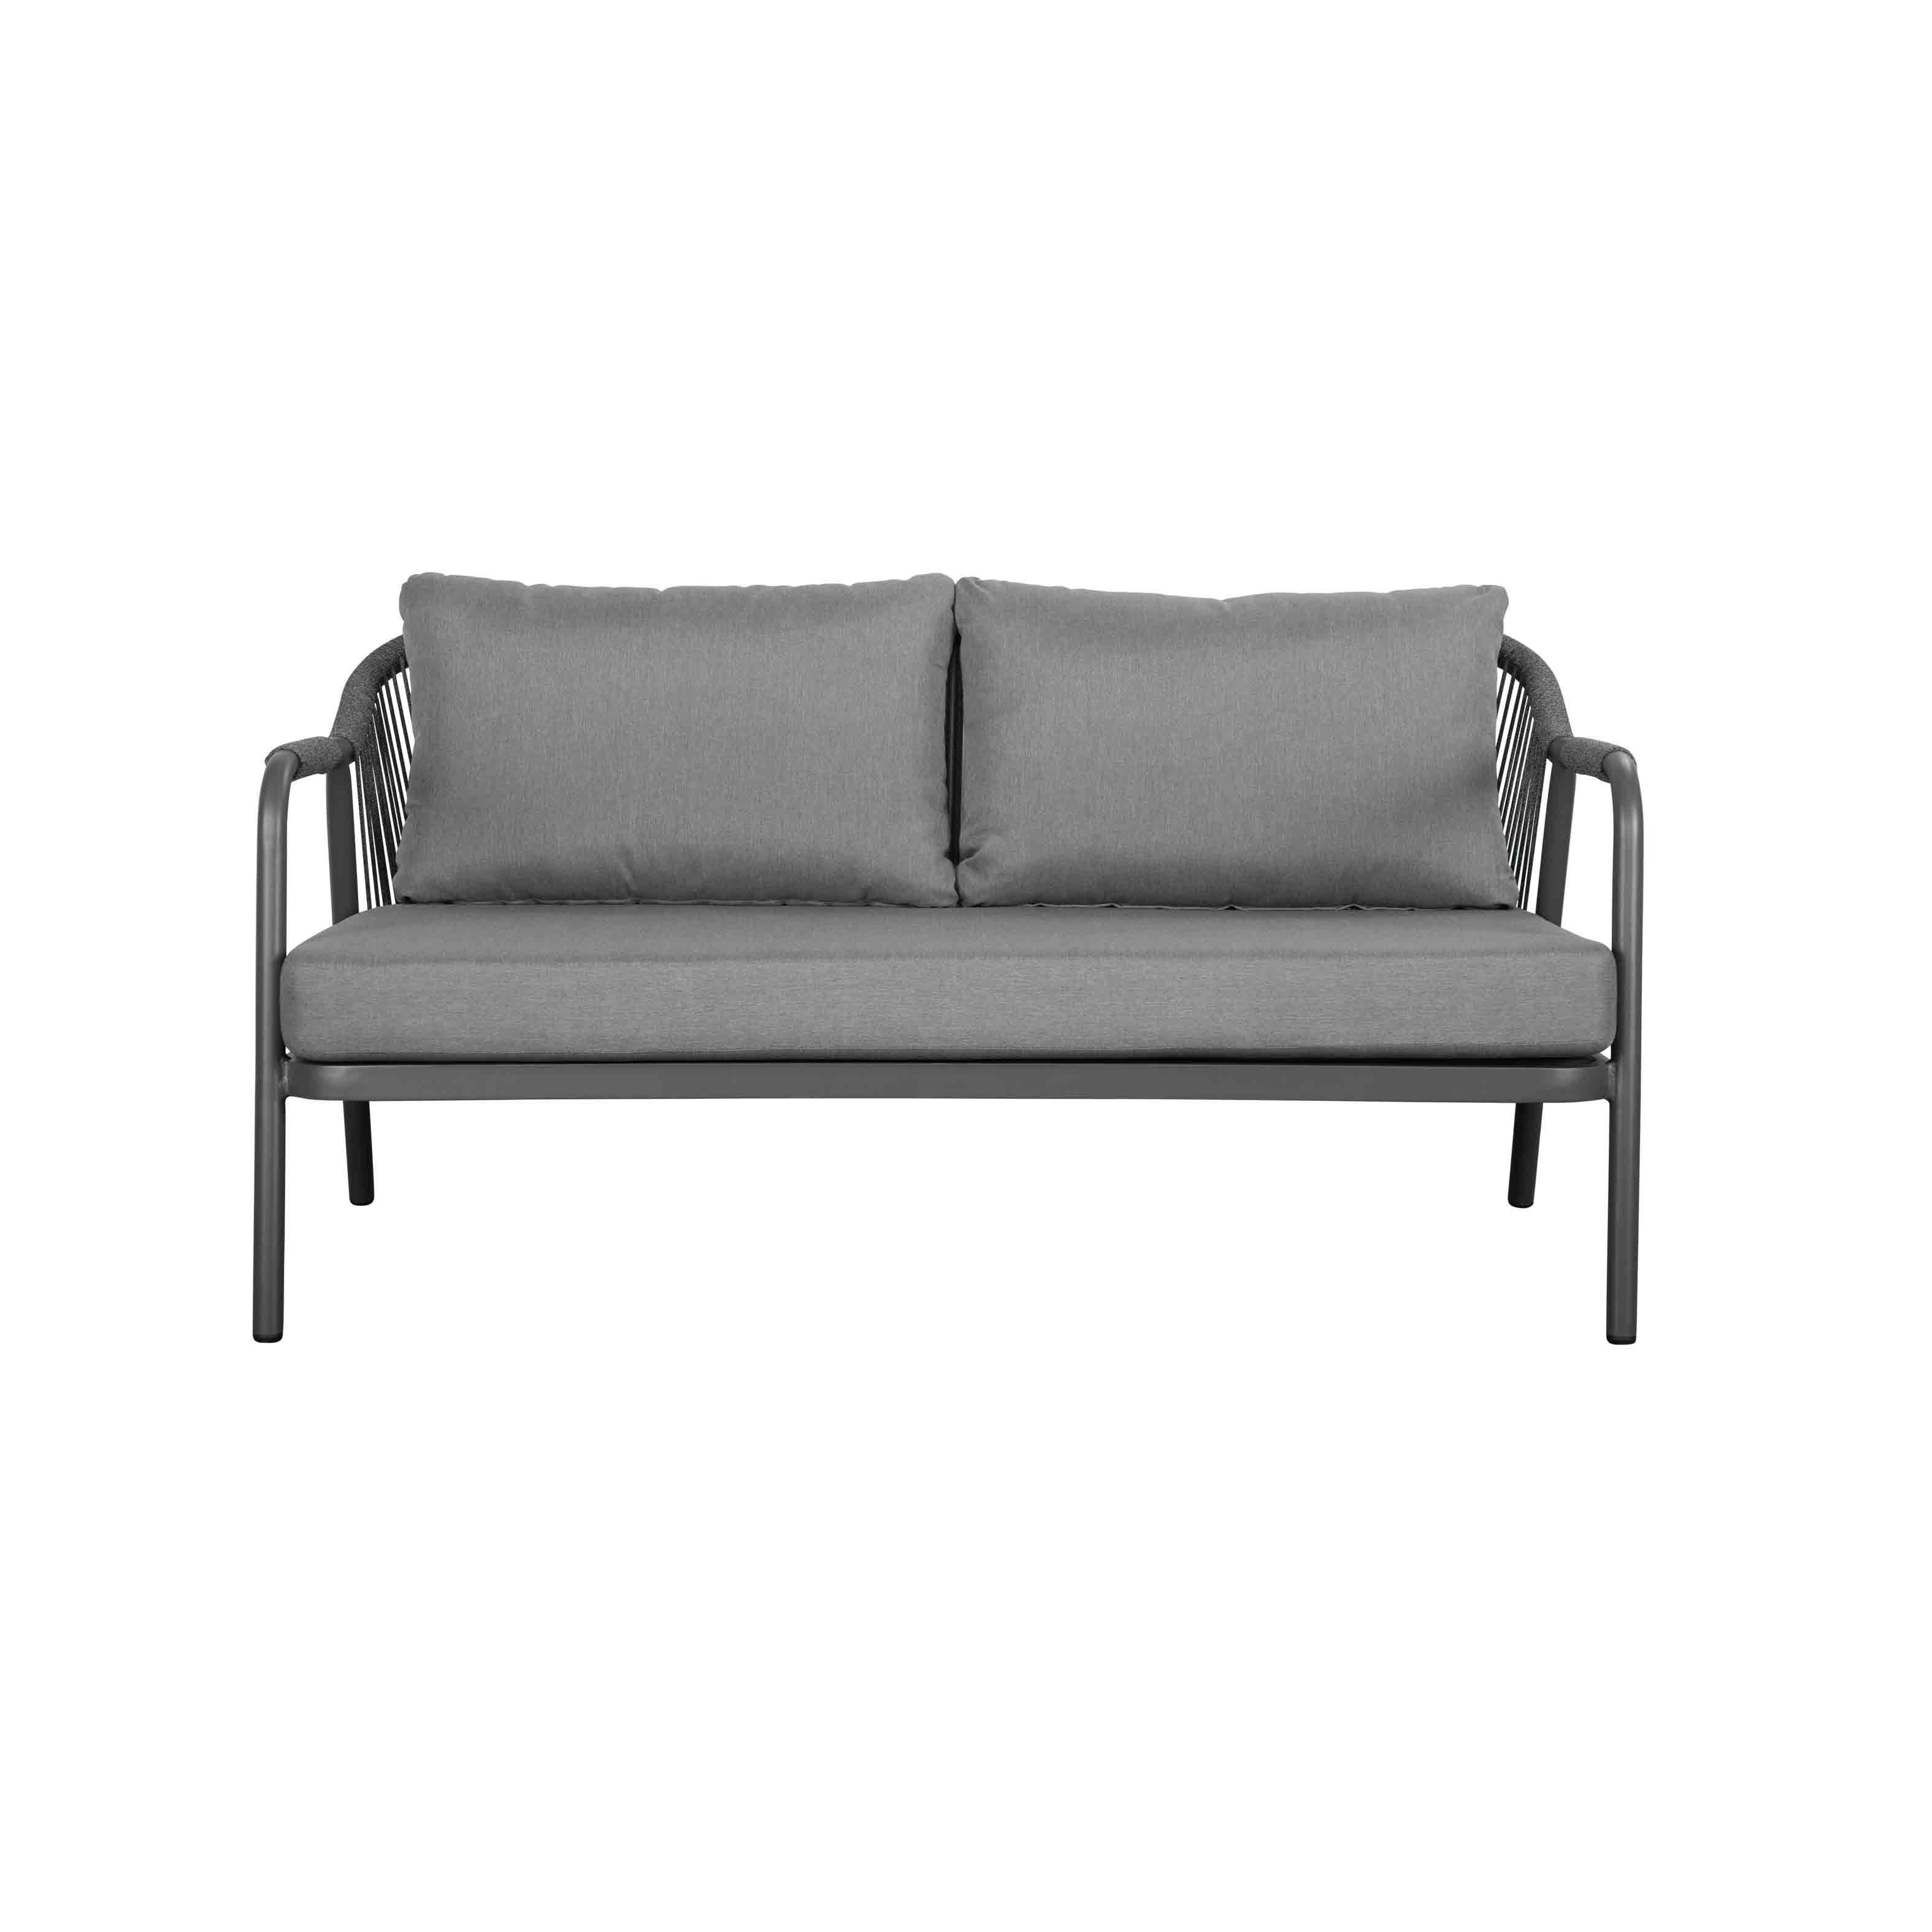 Roger rope 2-seat sofa S2